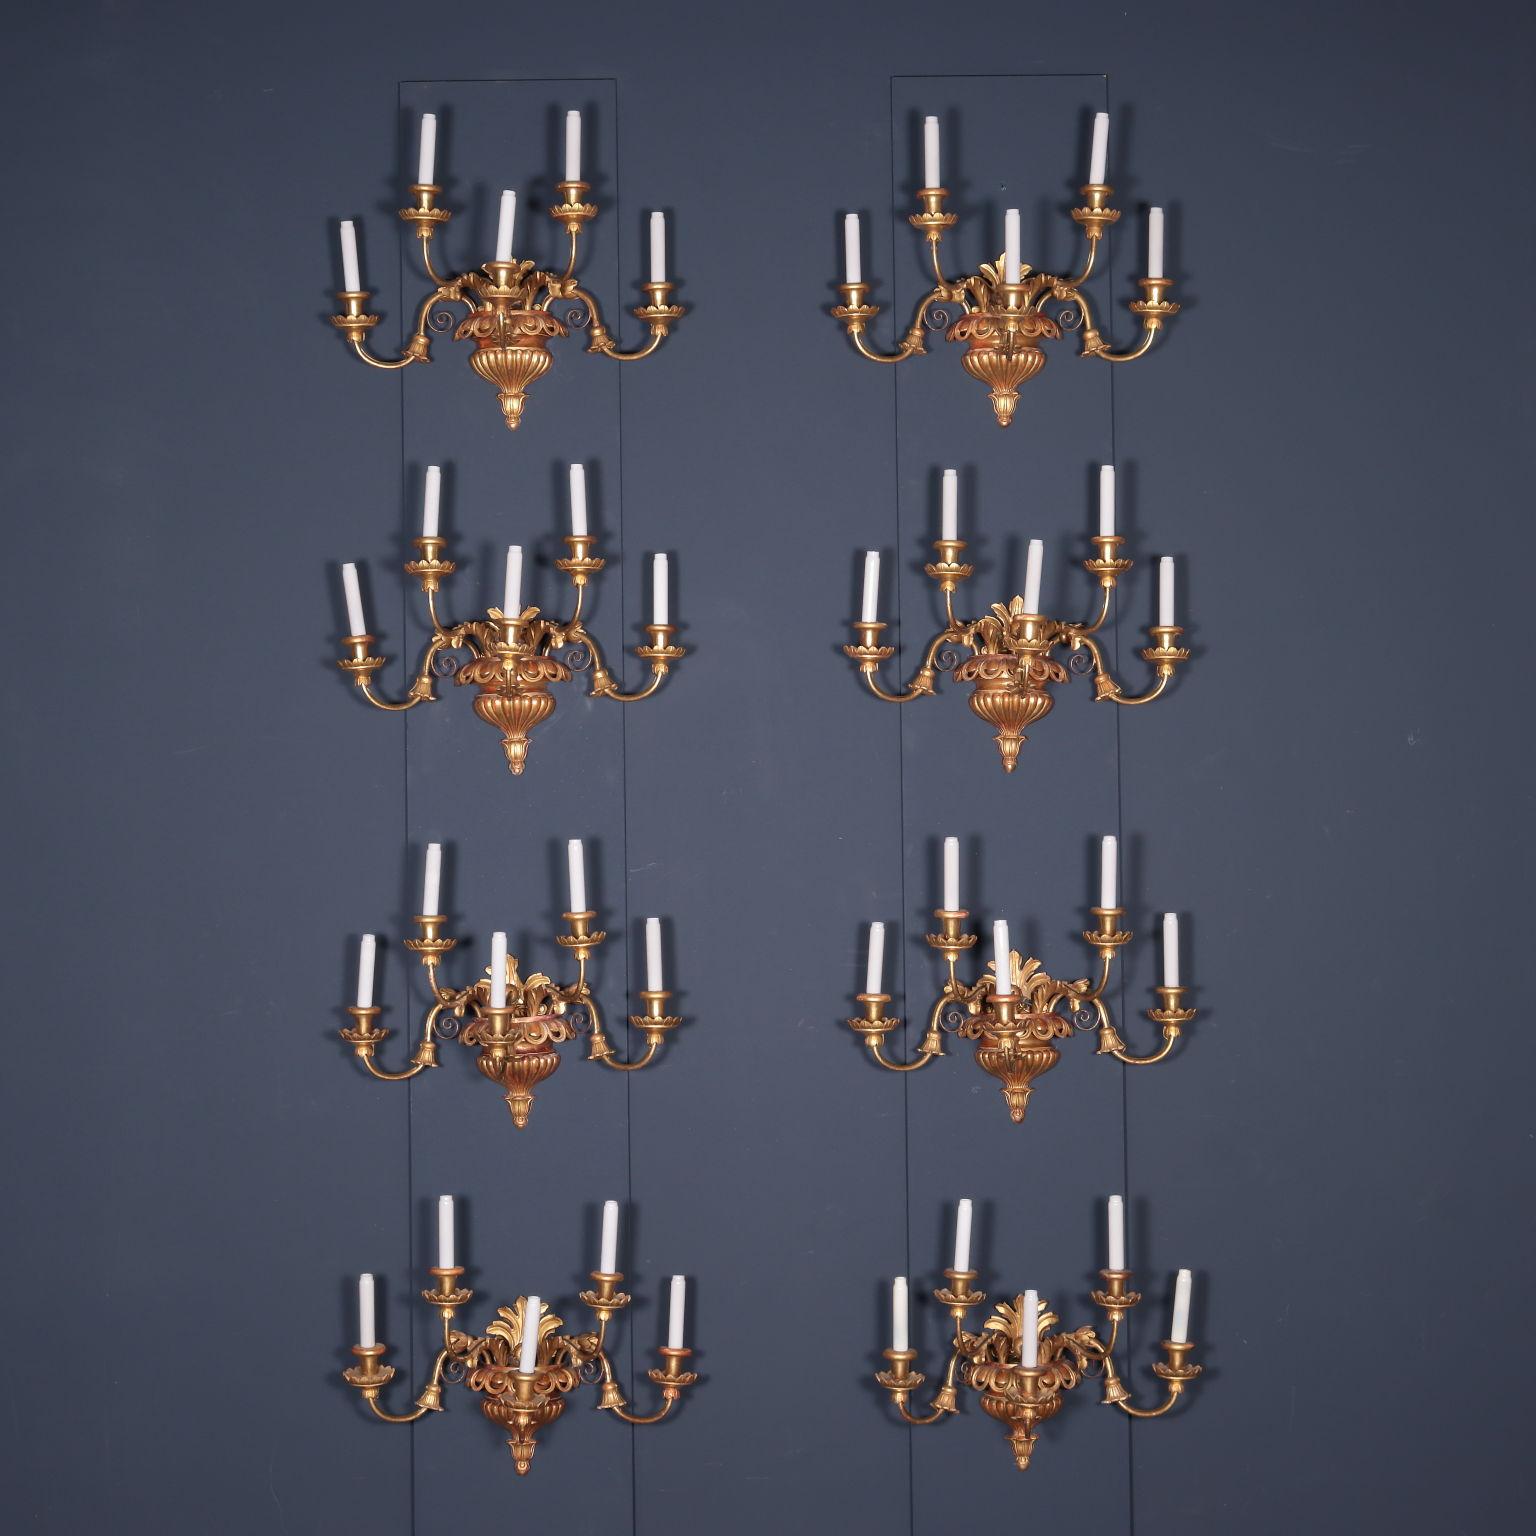 Group of eight Viennese Biedermeier appliques, the support is made up of an element in the shape of a poded vase, with a floral corolla forming the lower part; the upper edge is also poded and perforated. Leaf elements and five candle-holding arms